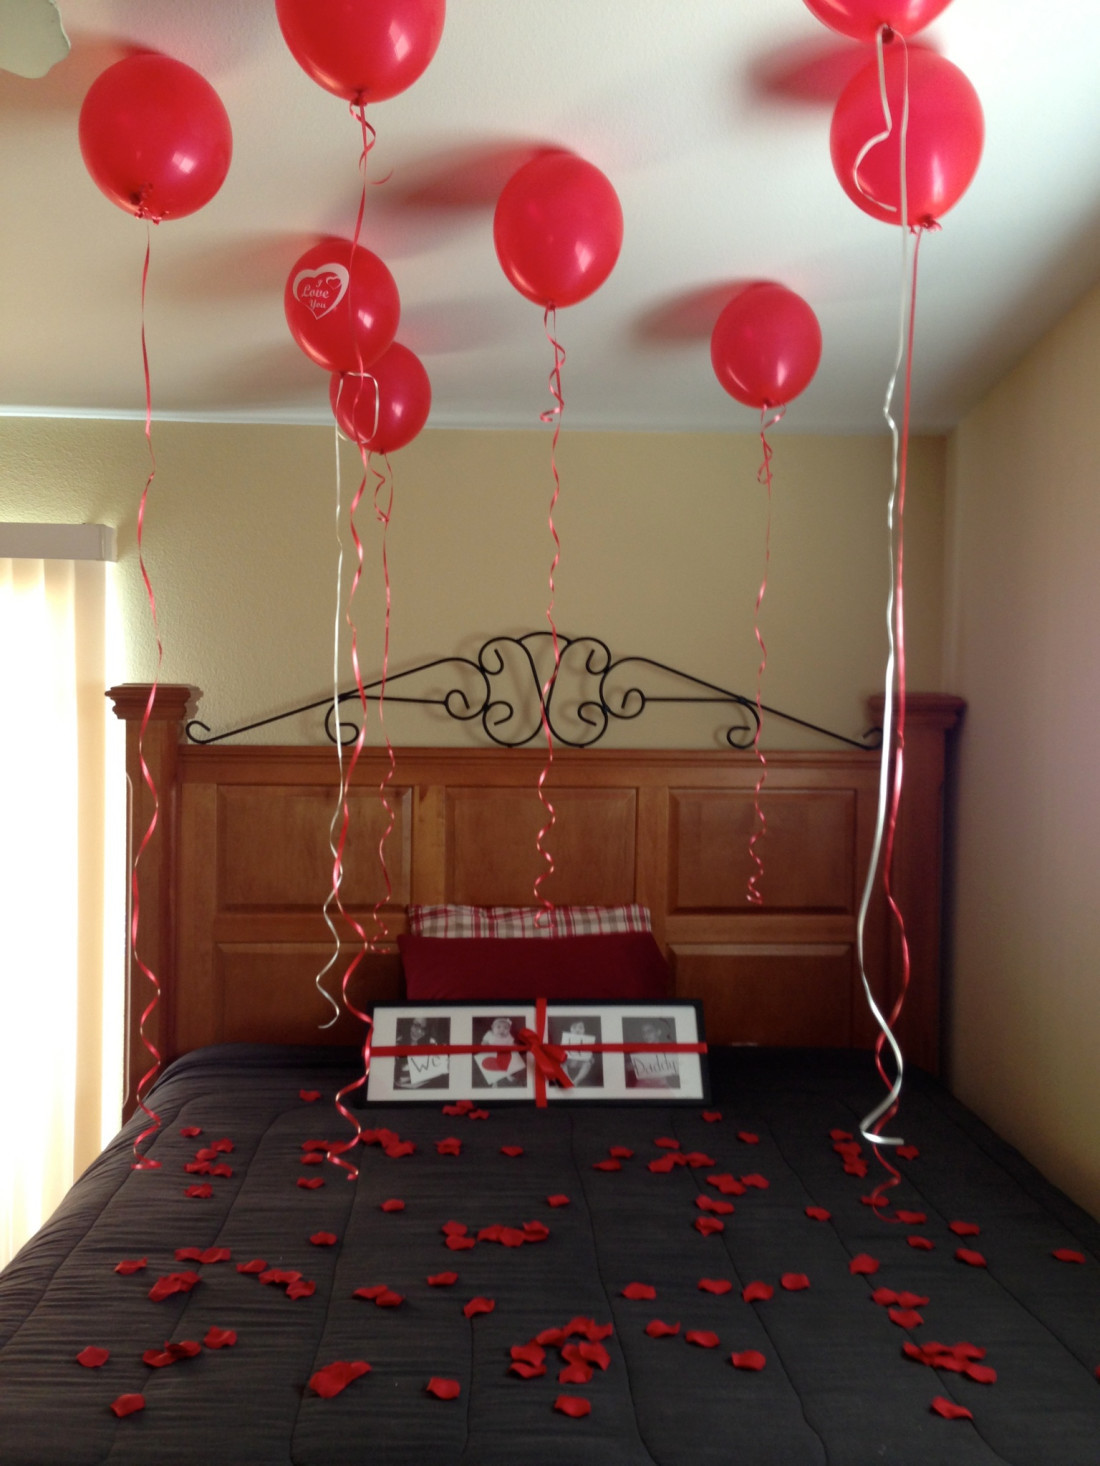 Valentines Gift Ideas For My Wife
 10 Creative Ways to Surprise Your Hubby for Valentine s